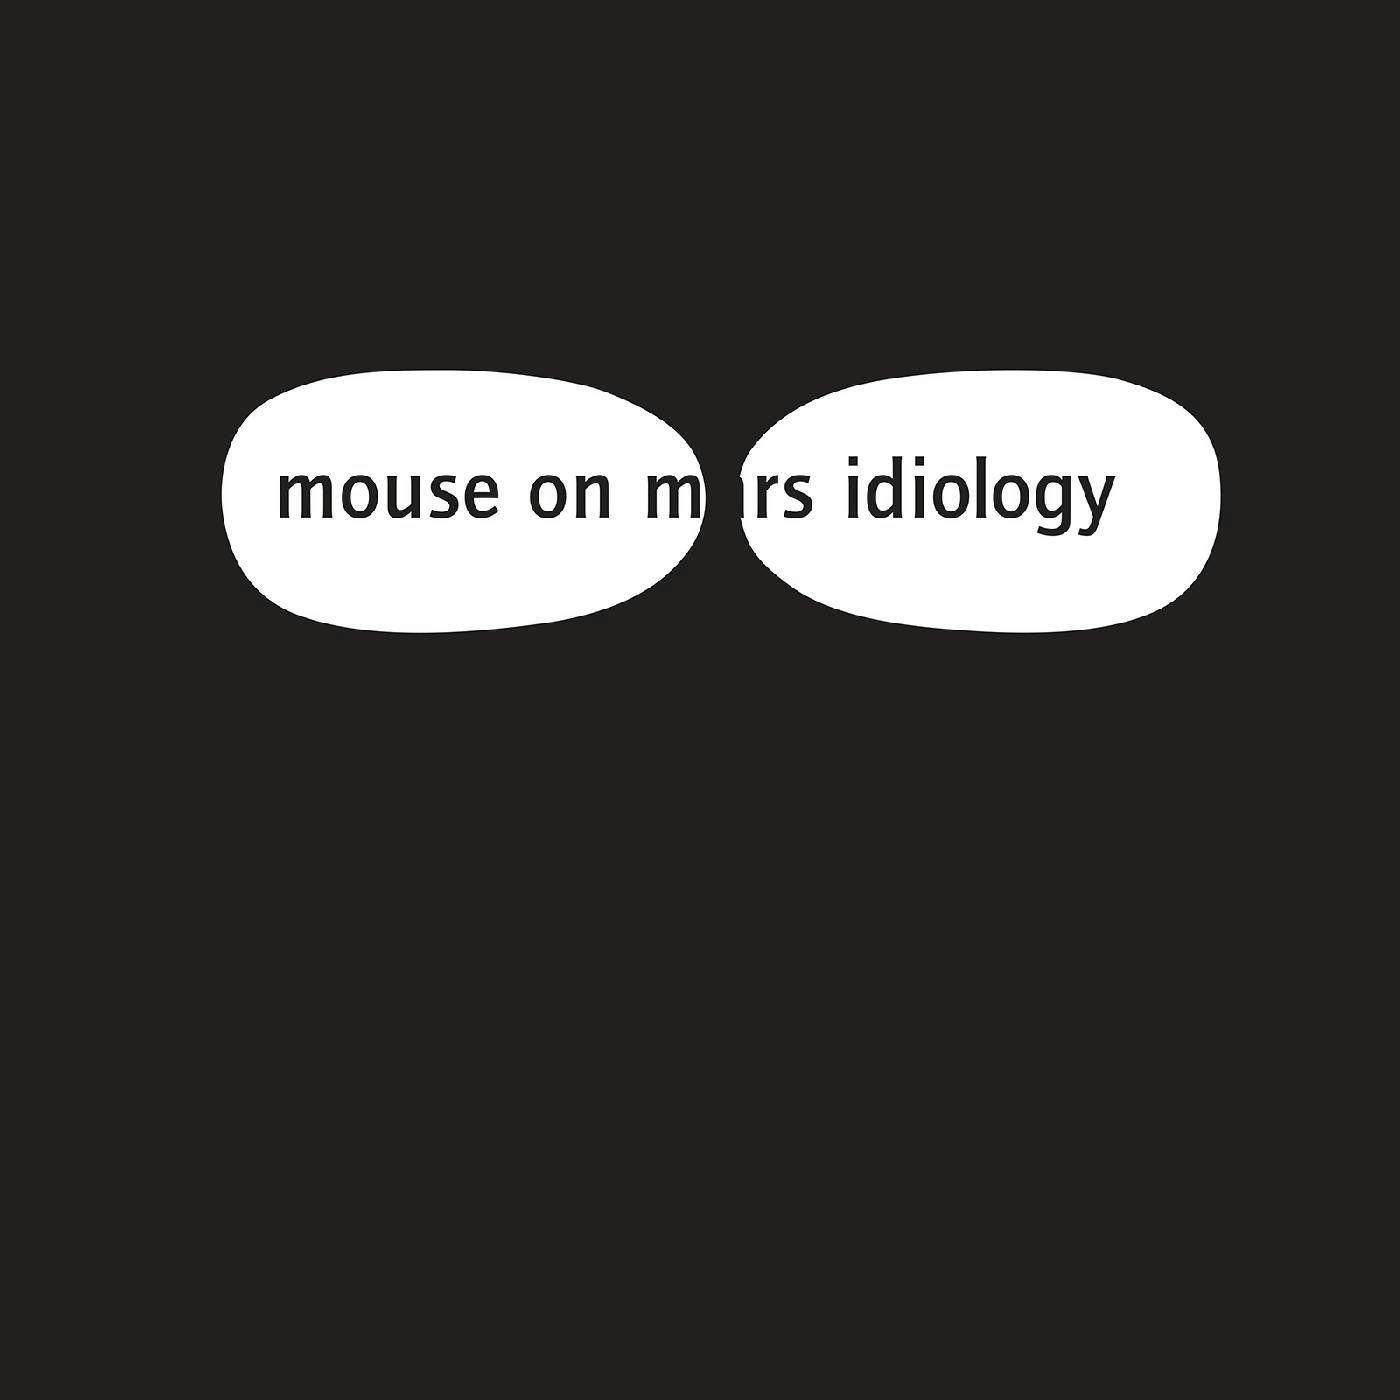 Mouse On Mars Idiology (White) Vinyl Record